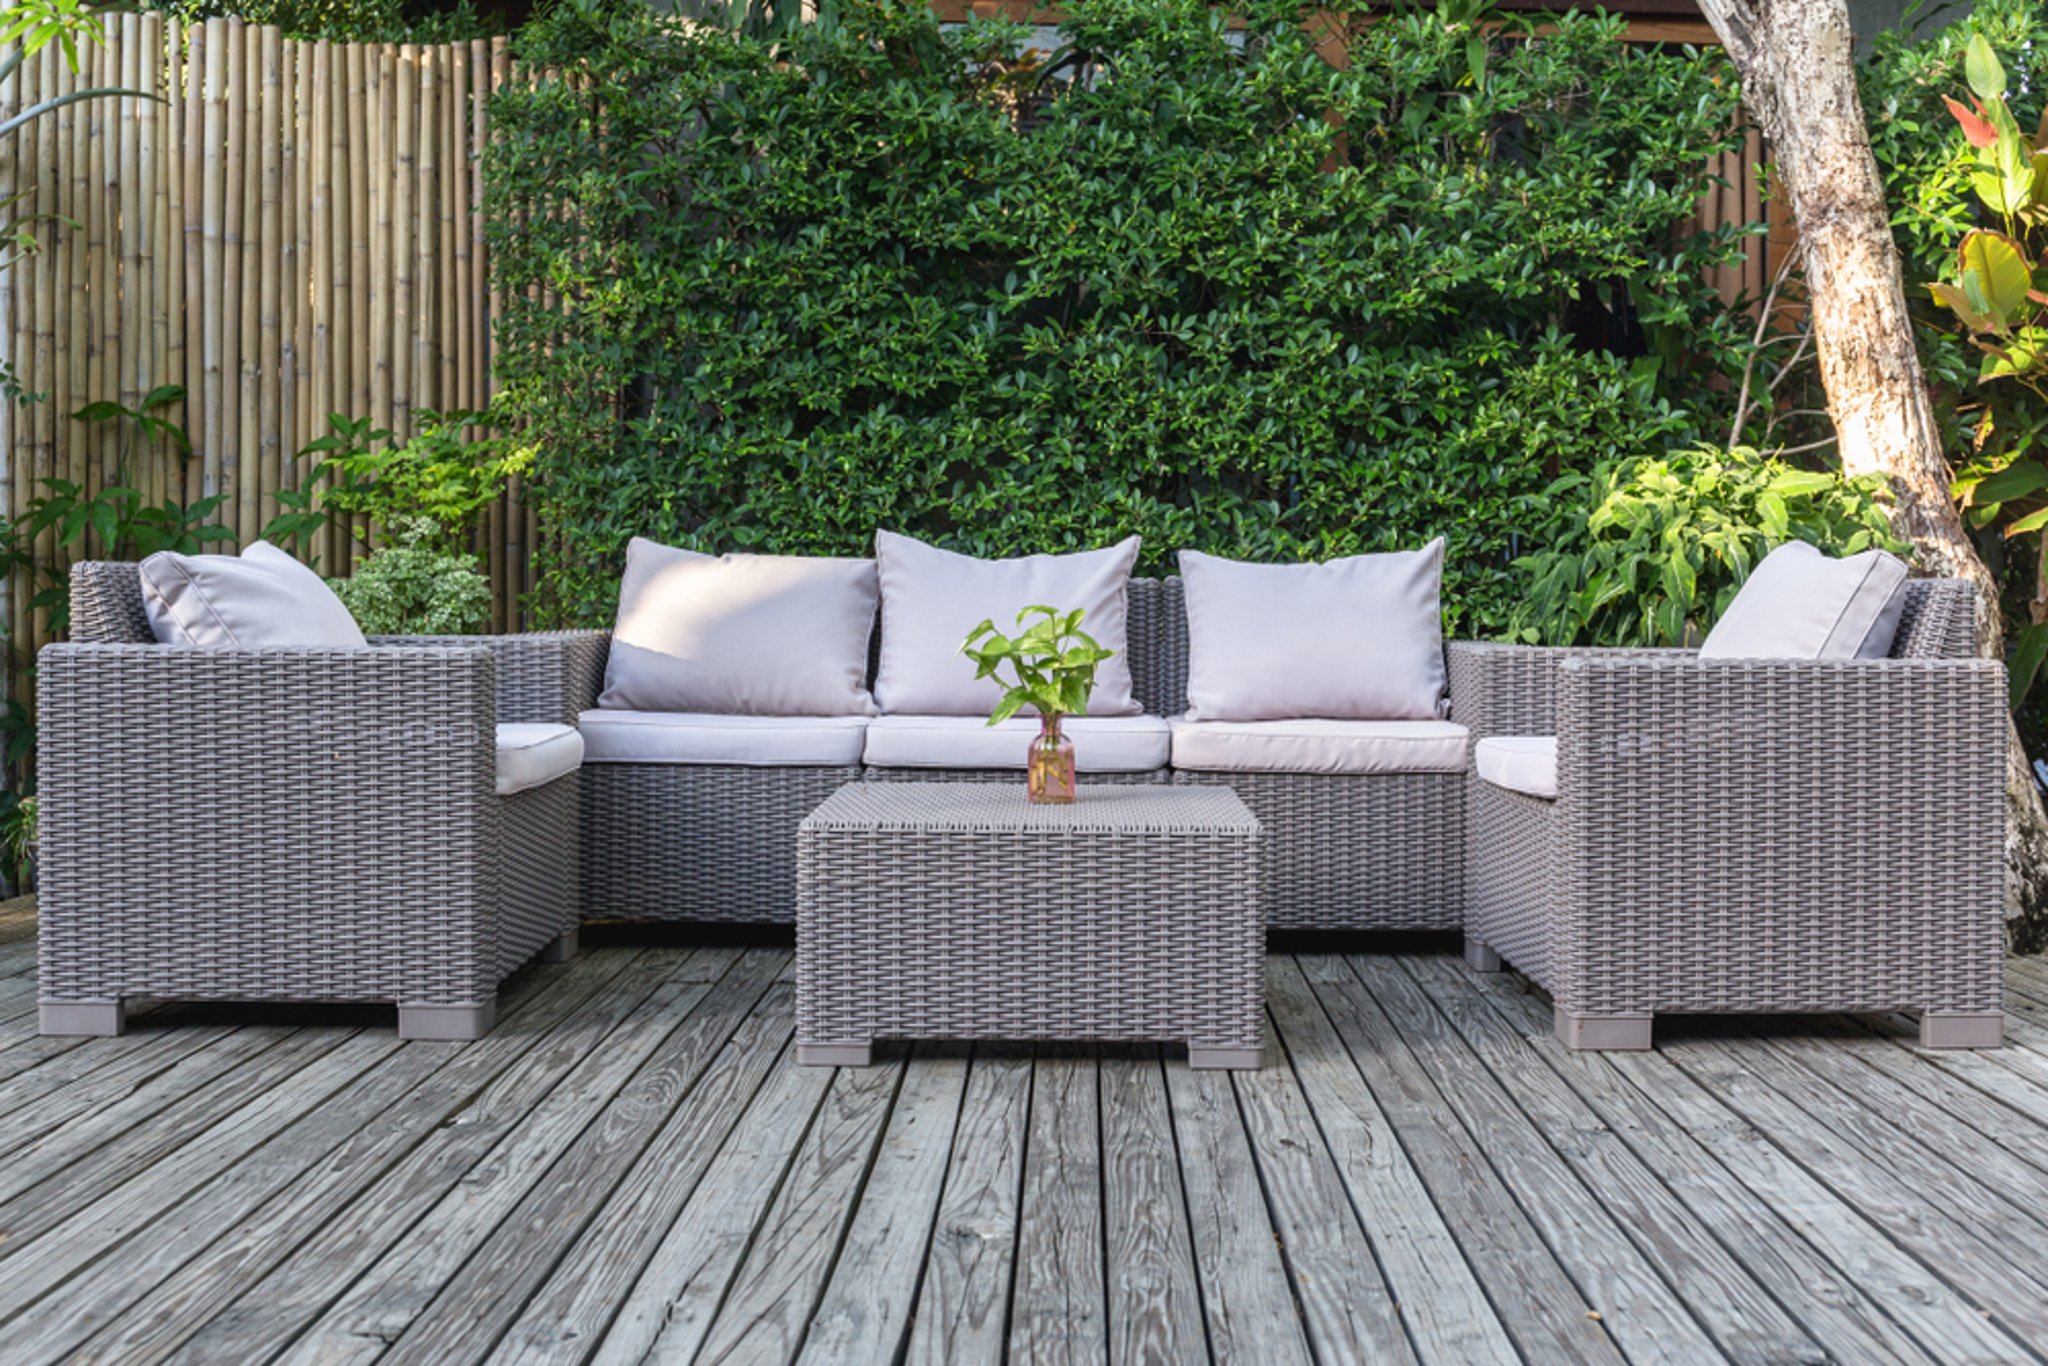 Best Rattan Garden Furniture 2021 Our, Who Has The Best Outdoor Furniture